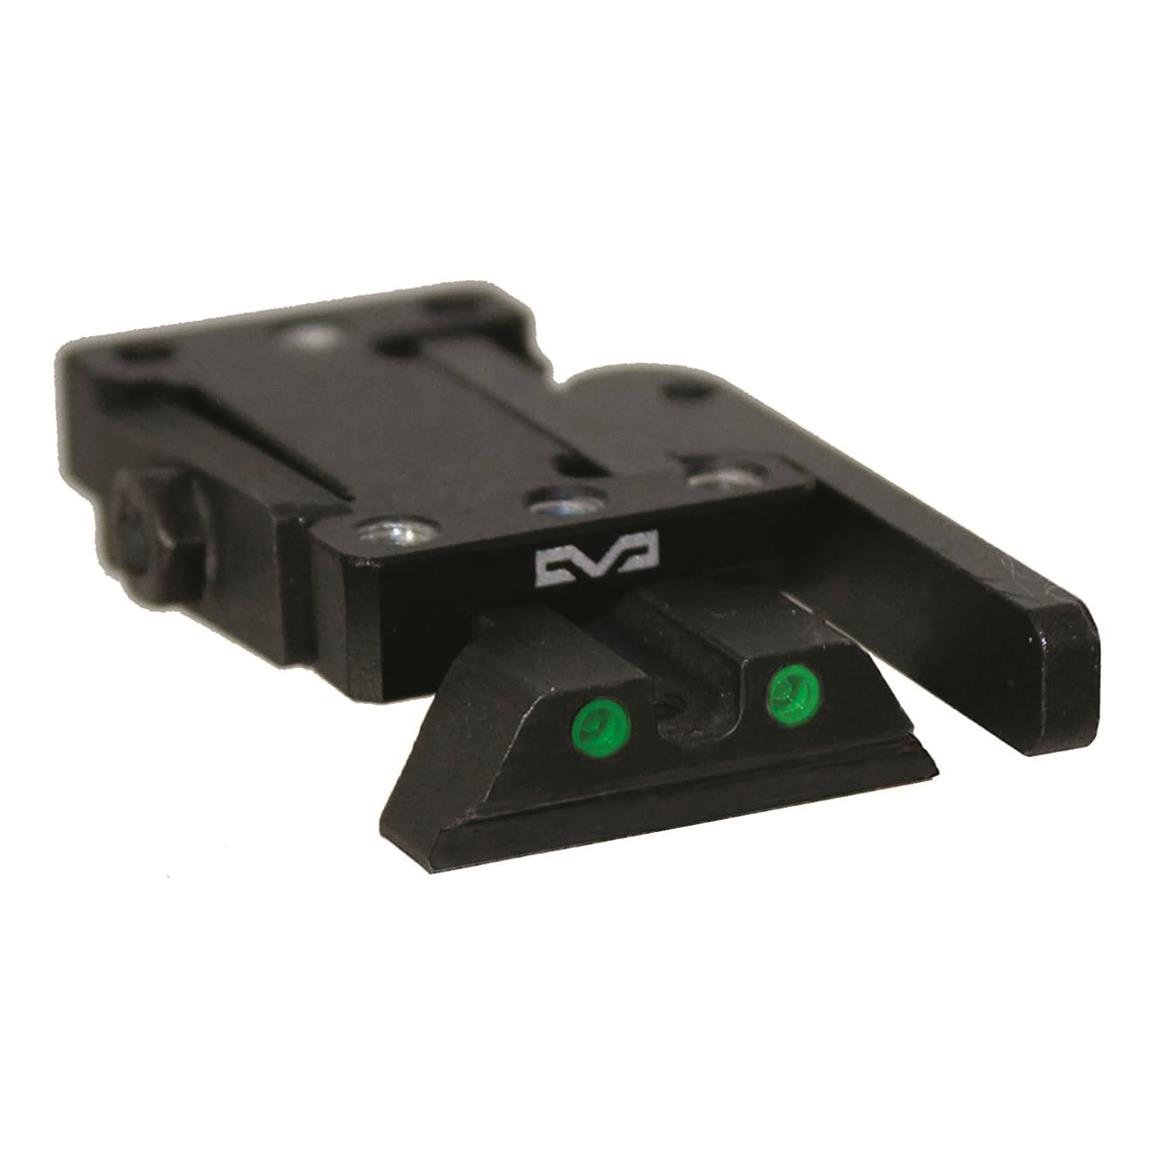 Meprolight microRDS Red Dot Quick Release Adaptor & Back-up Sights